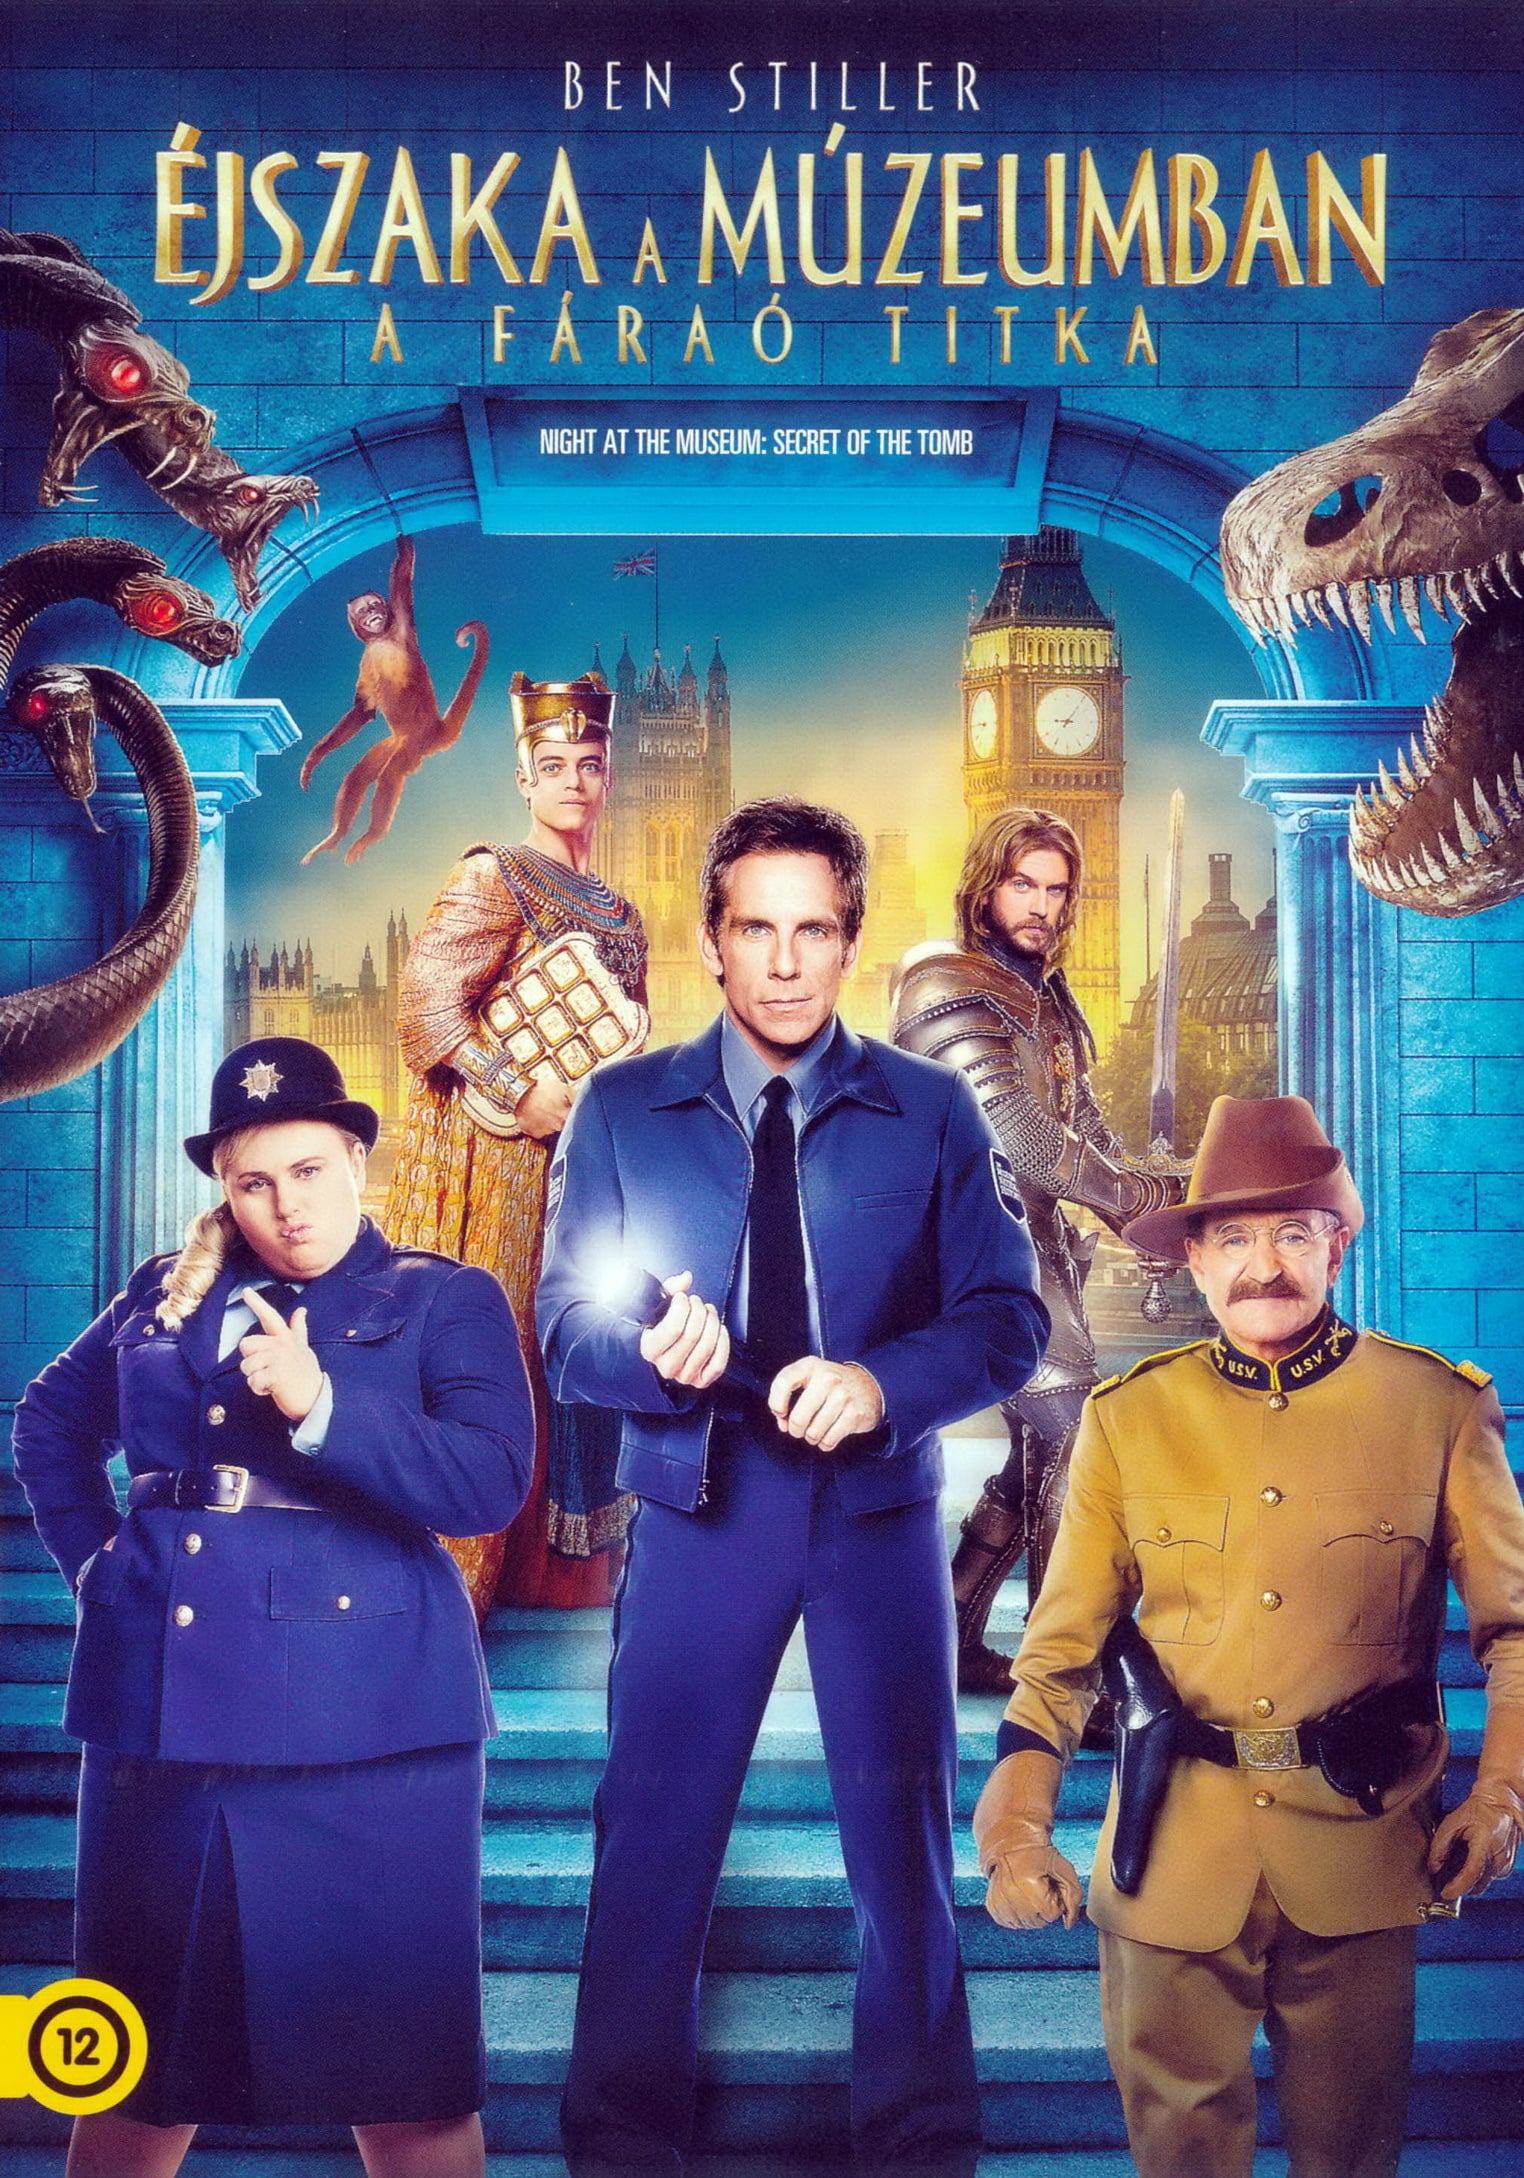 night at the museum 3 full movie in hindi free download hd